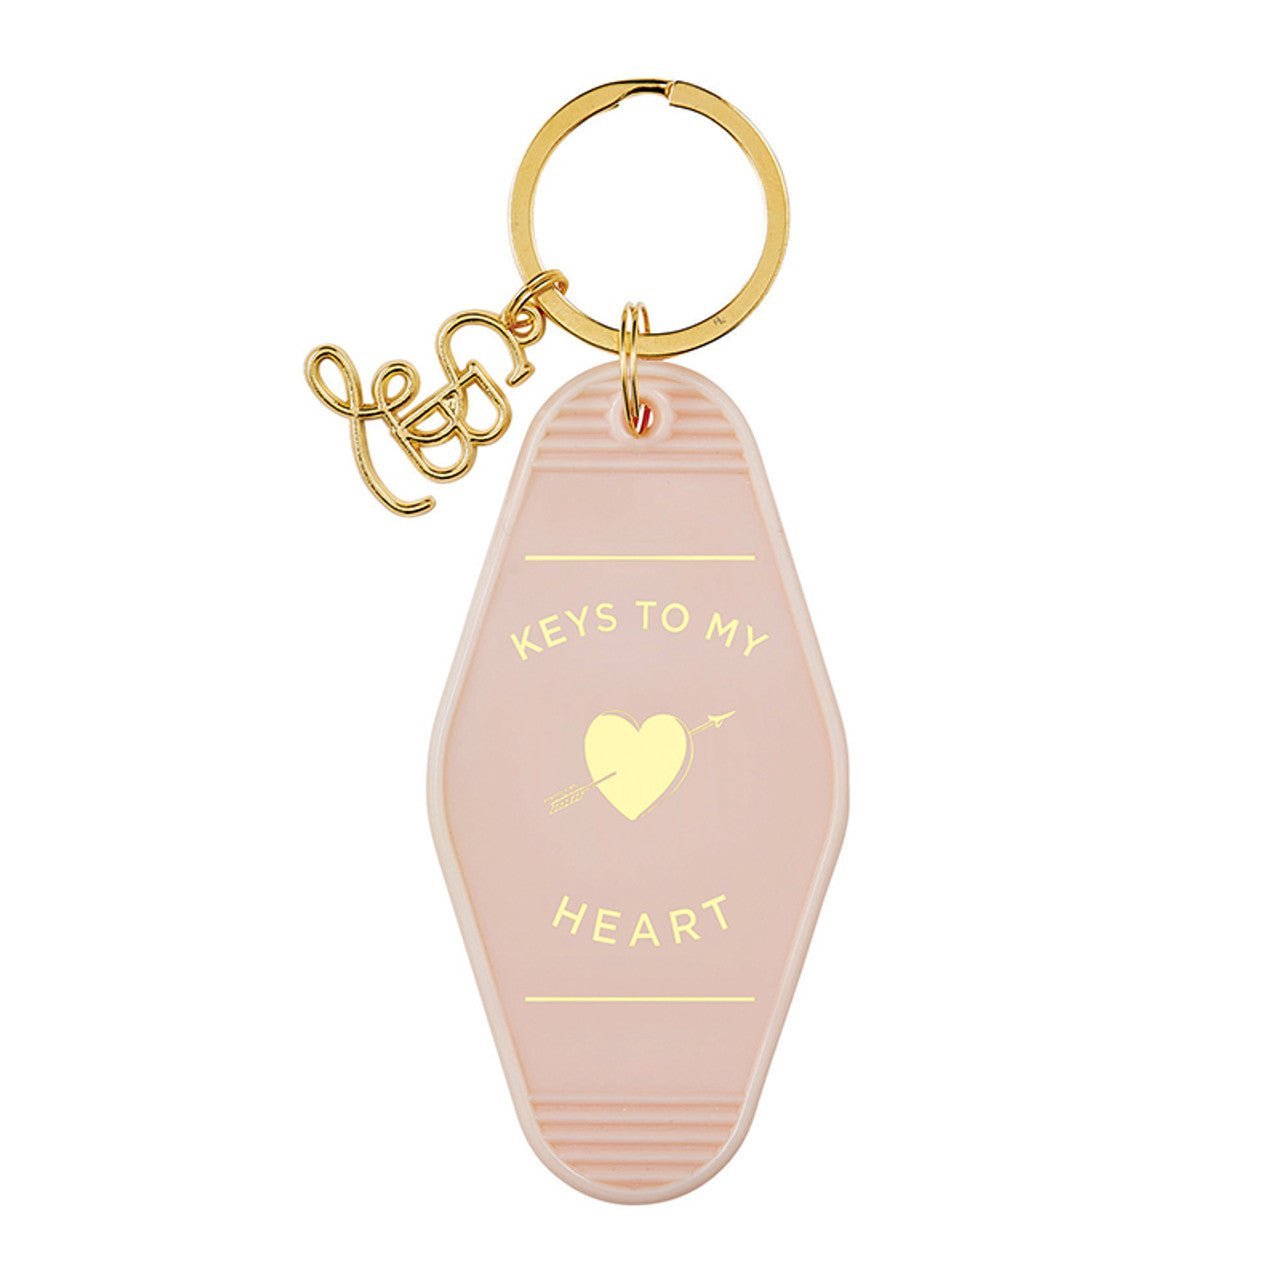 Keys To My Heart Motel Keychain in Pink with Gold Hardware